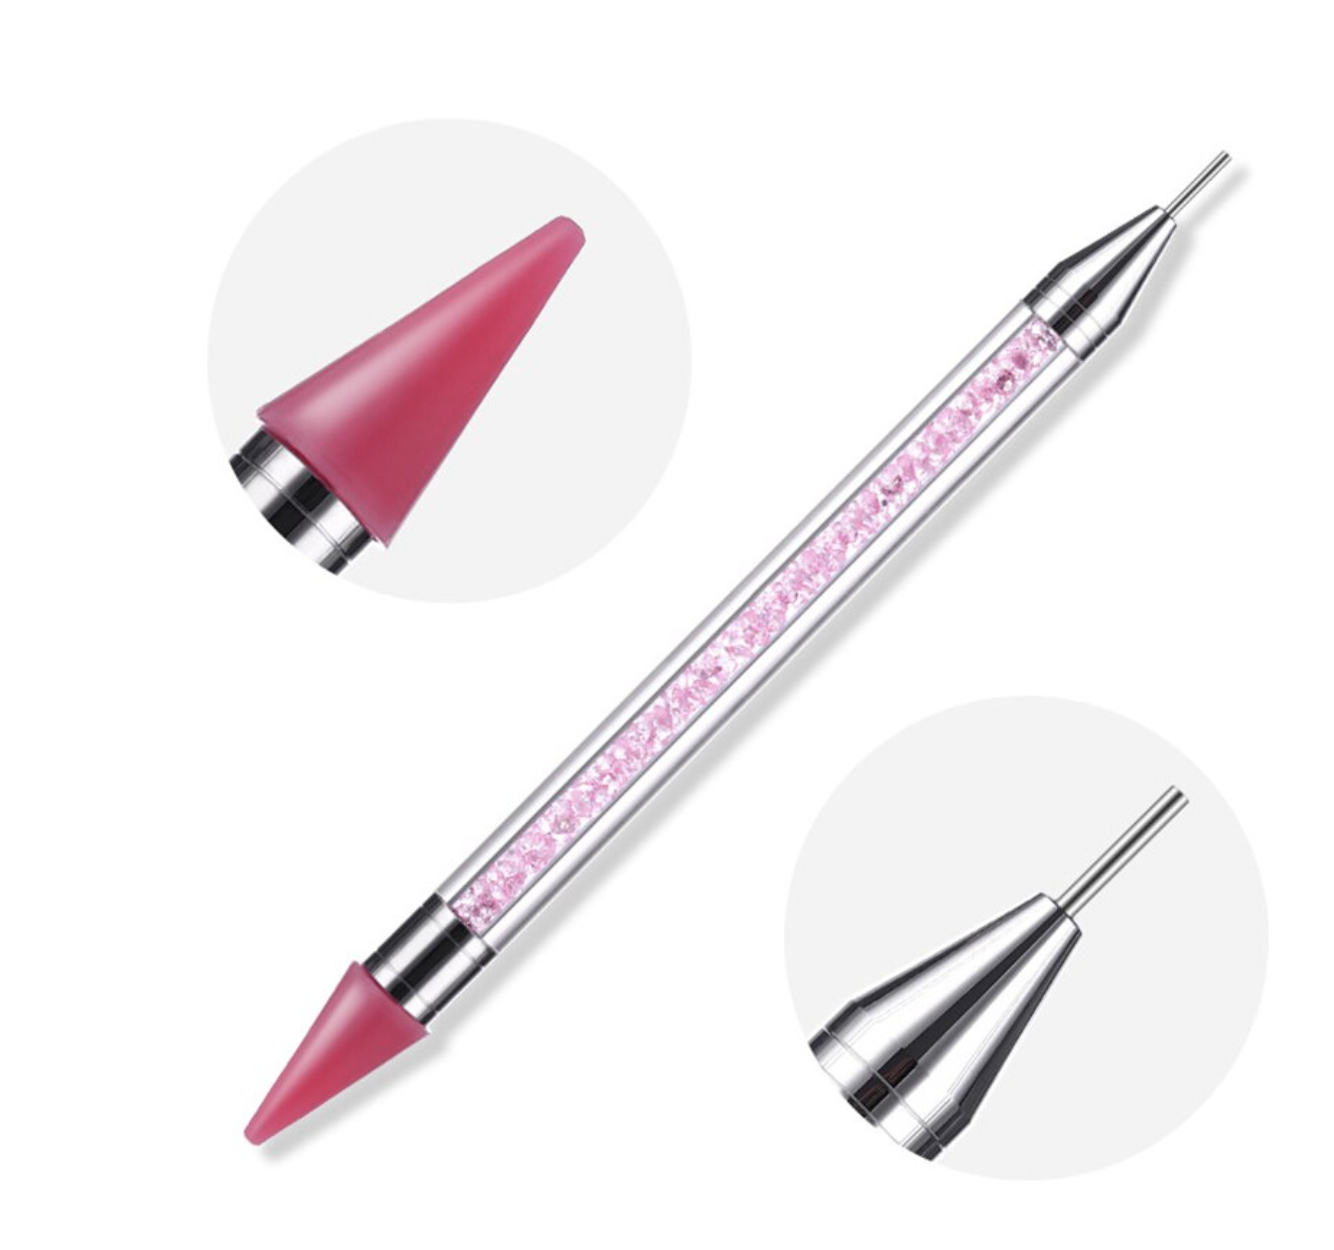 Wax Pen Rhinestones Gem Picker with Crystals with two extra wax ends - 1 pc - pink